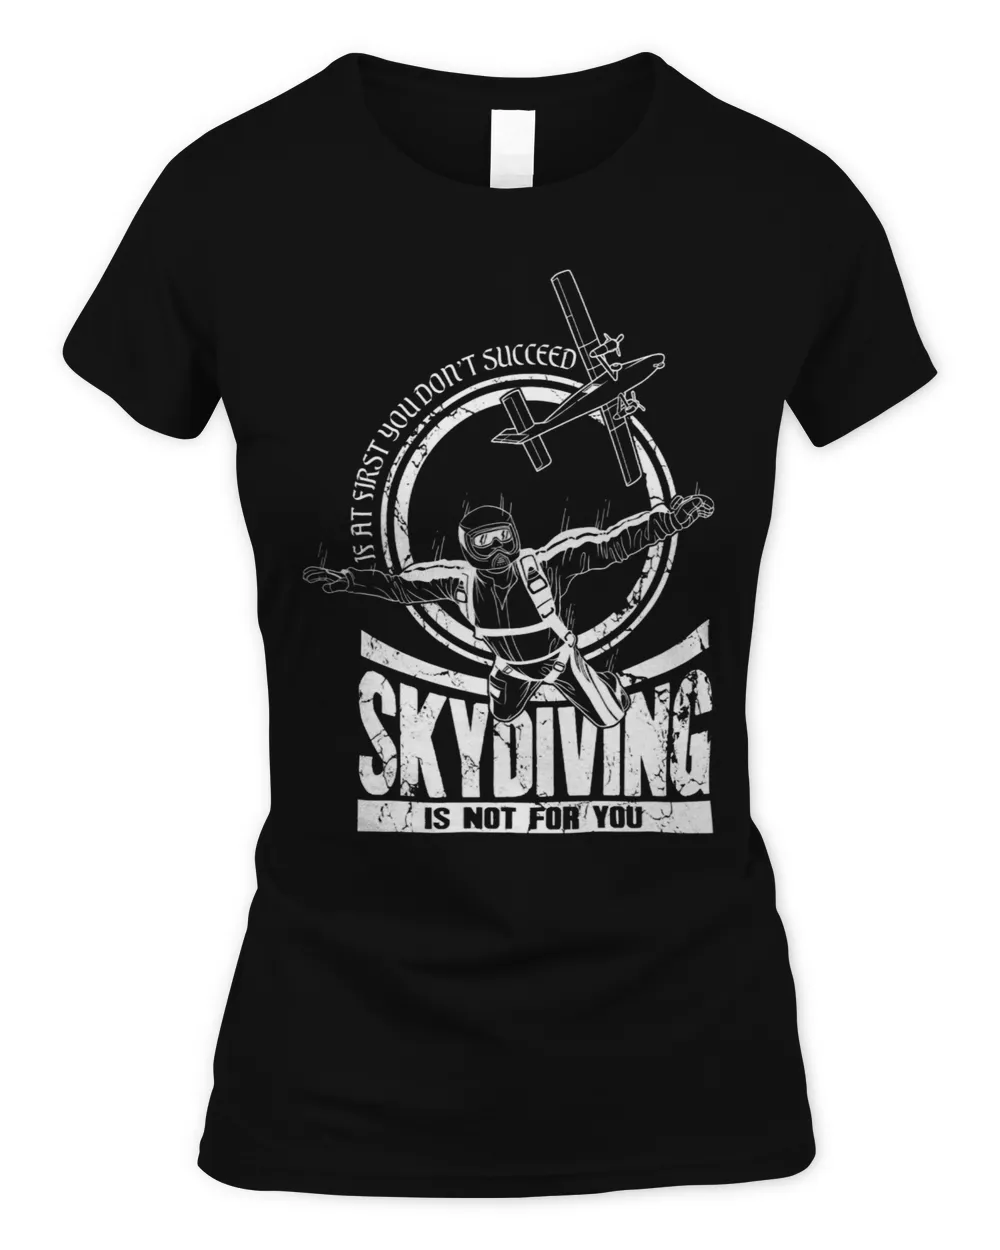 Skydiving Gift If At First You Dont Succeed Skydiving Is Not For You 3